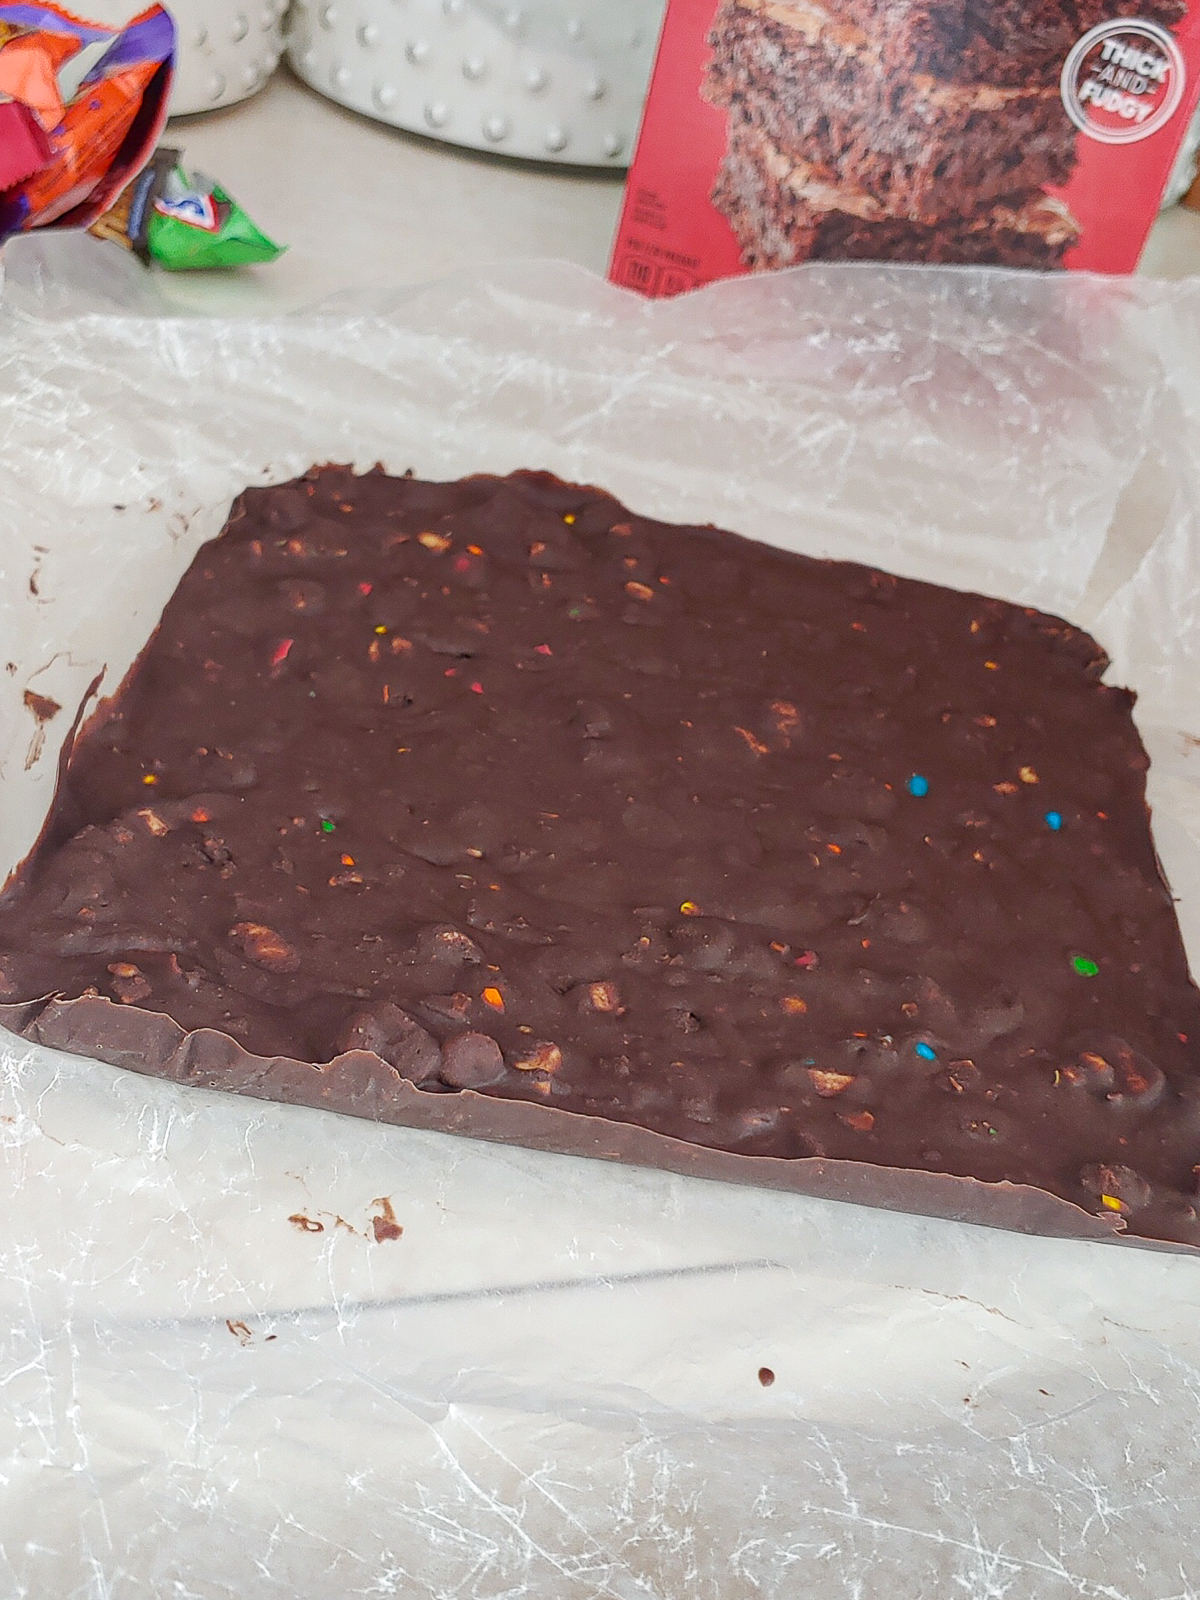 Frozen melted leftover Halloween candy ready to be sandwiched between 2 layers of brownie batter.